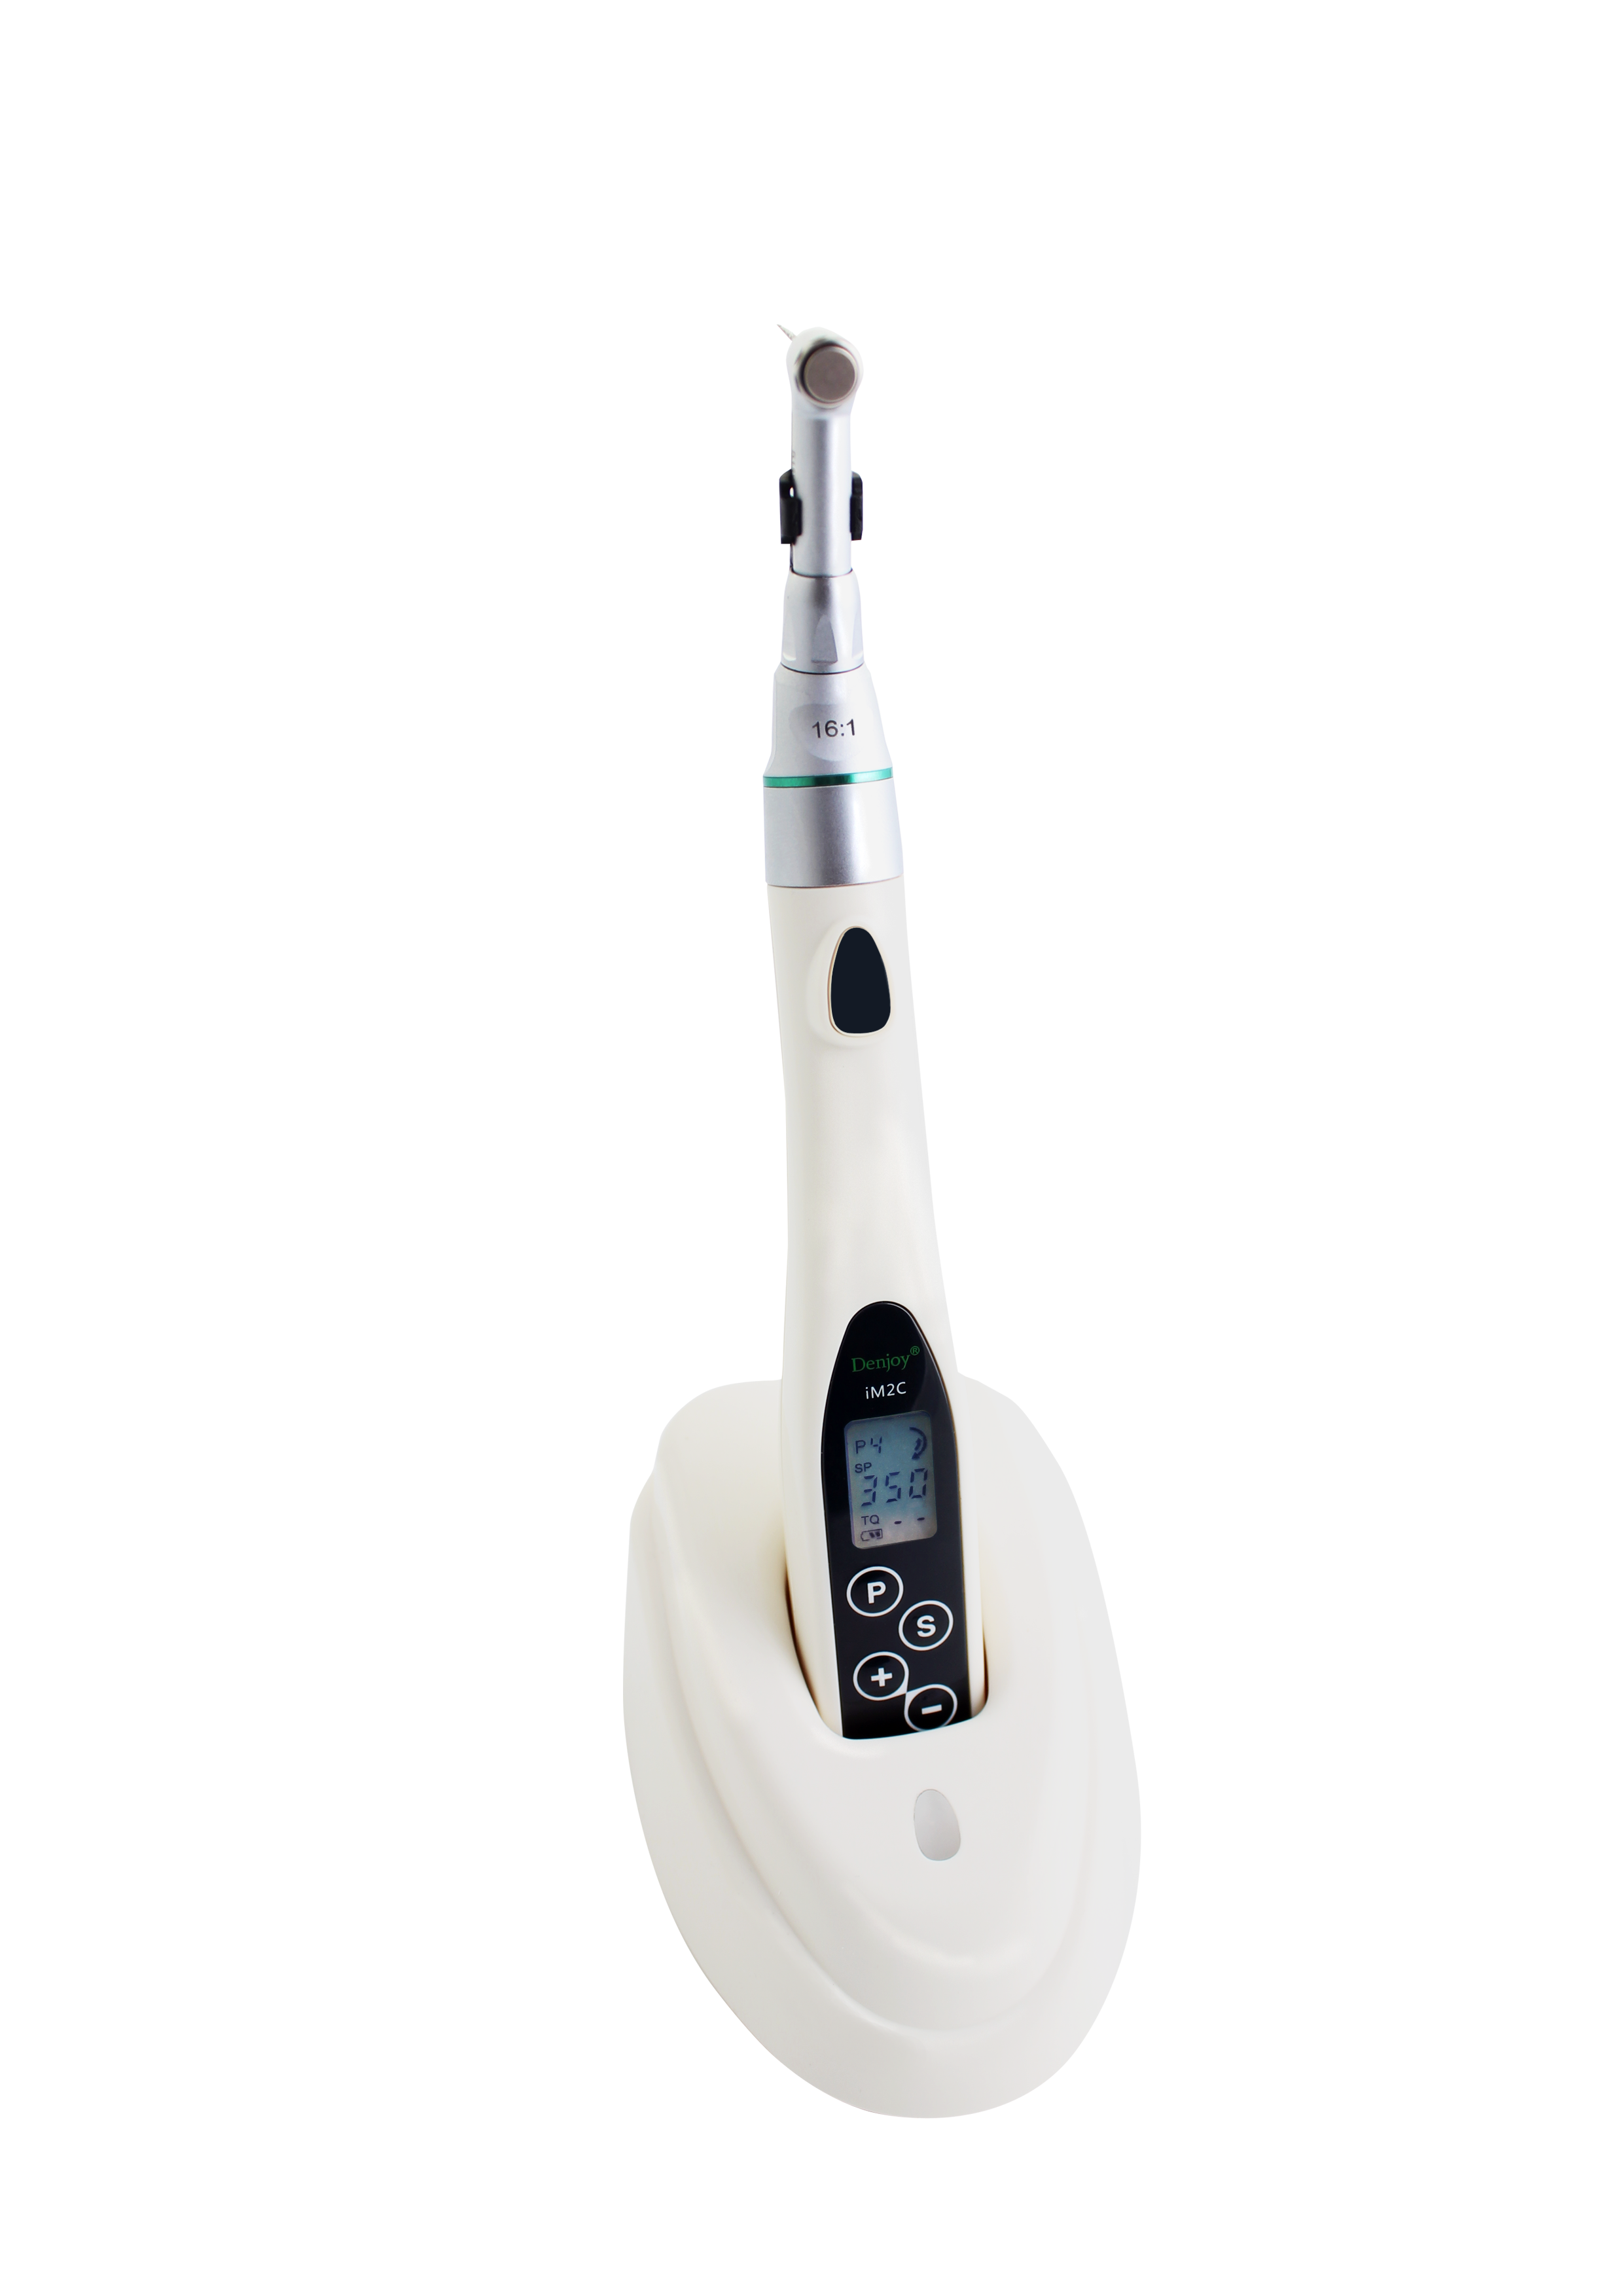 Dental Cardless  Endo Motor with led light with reciprocating function for rotary file   iM2c